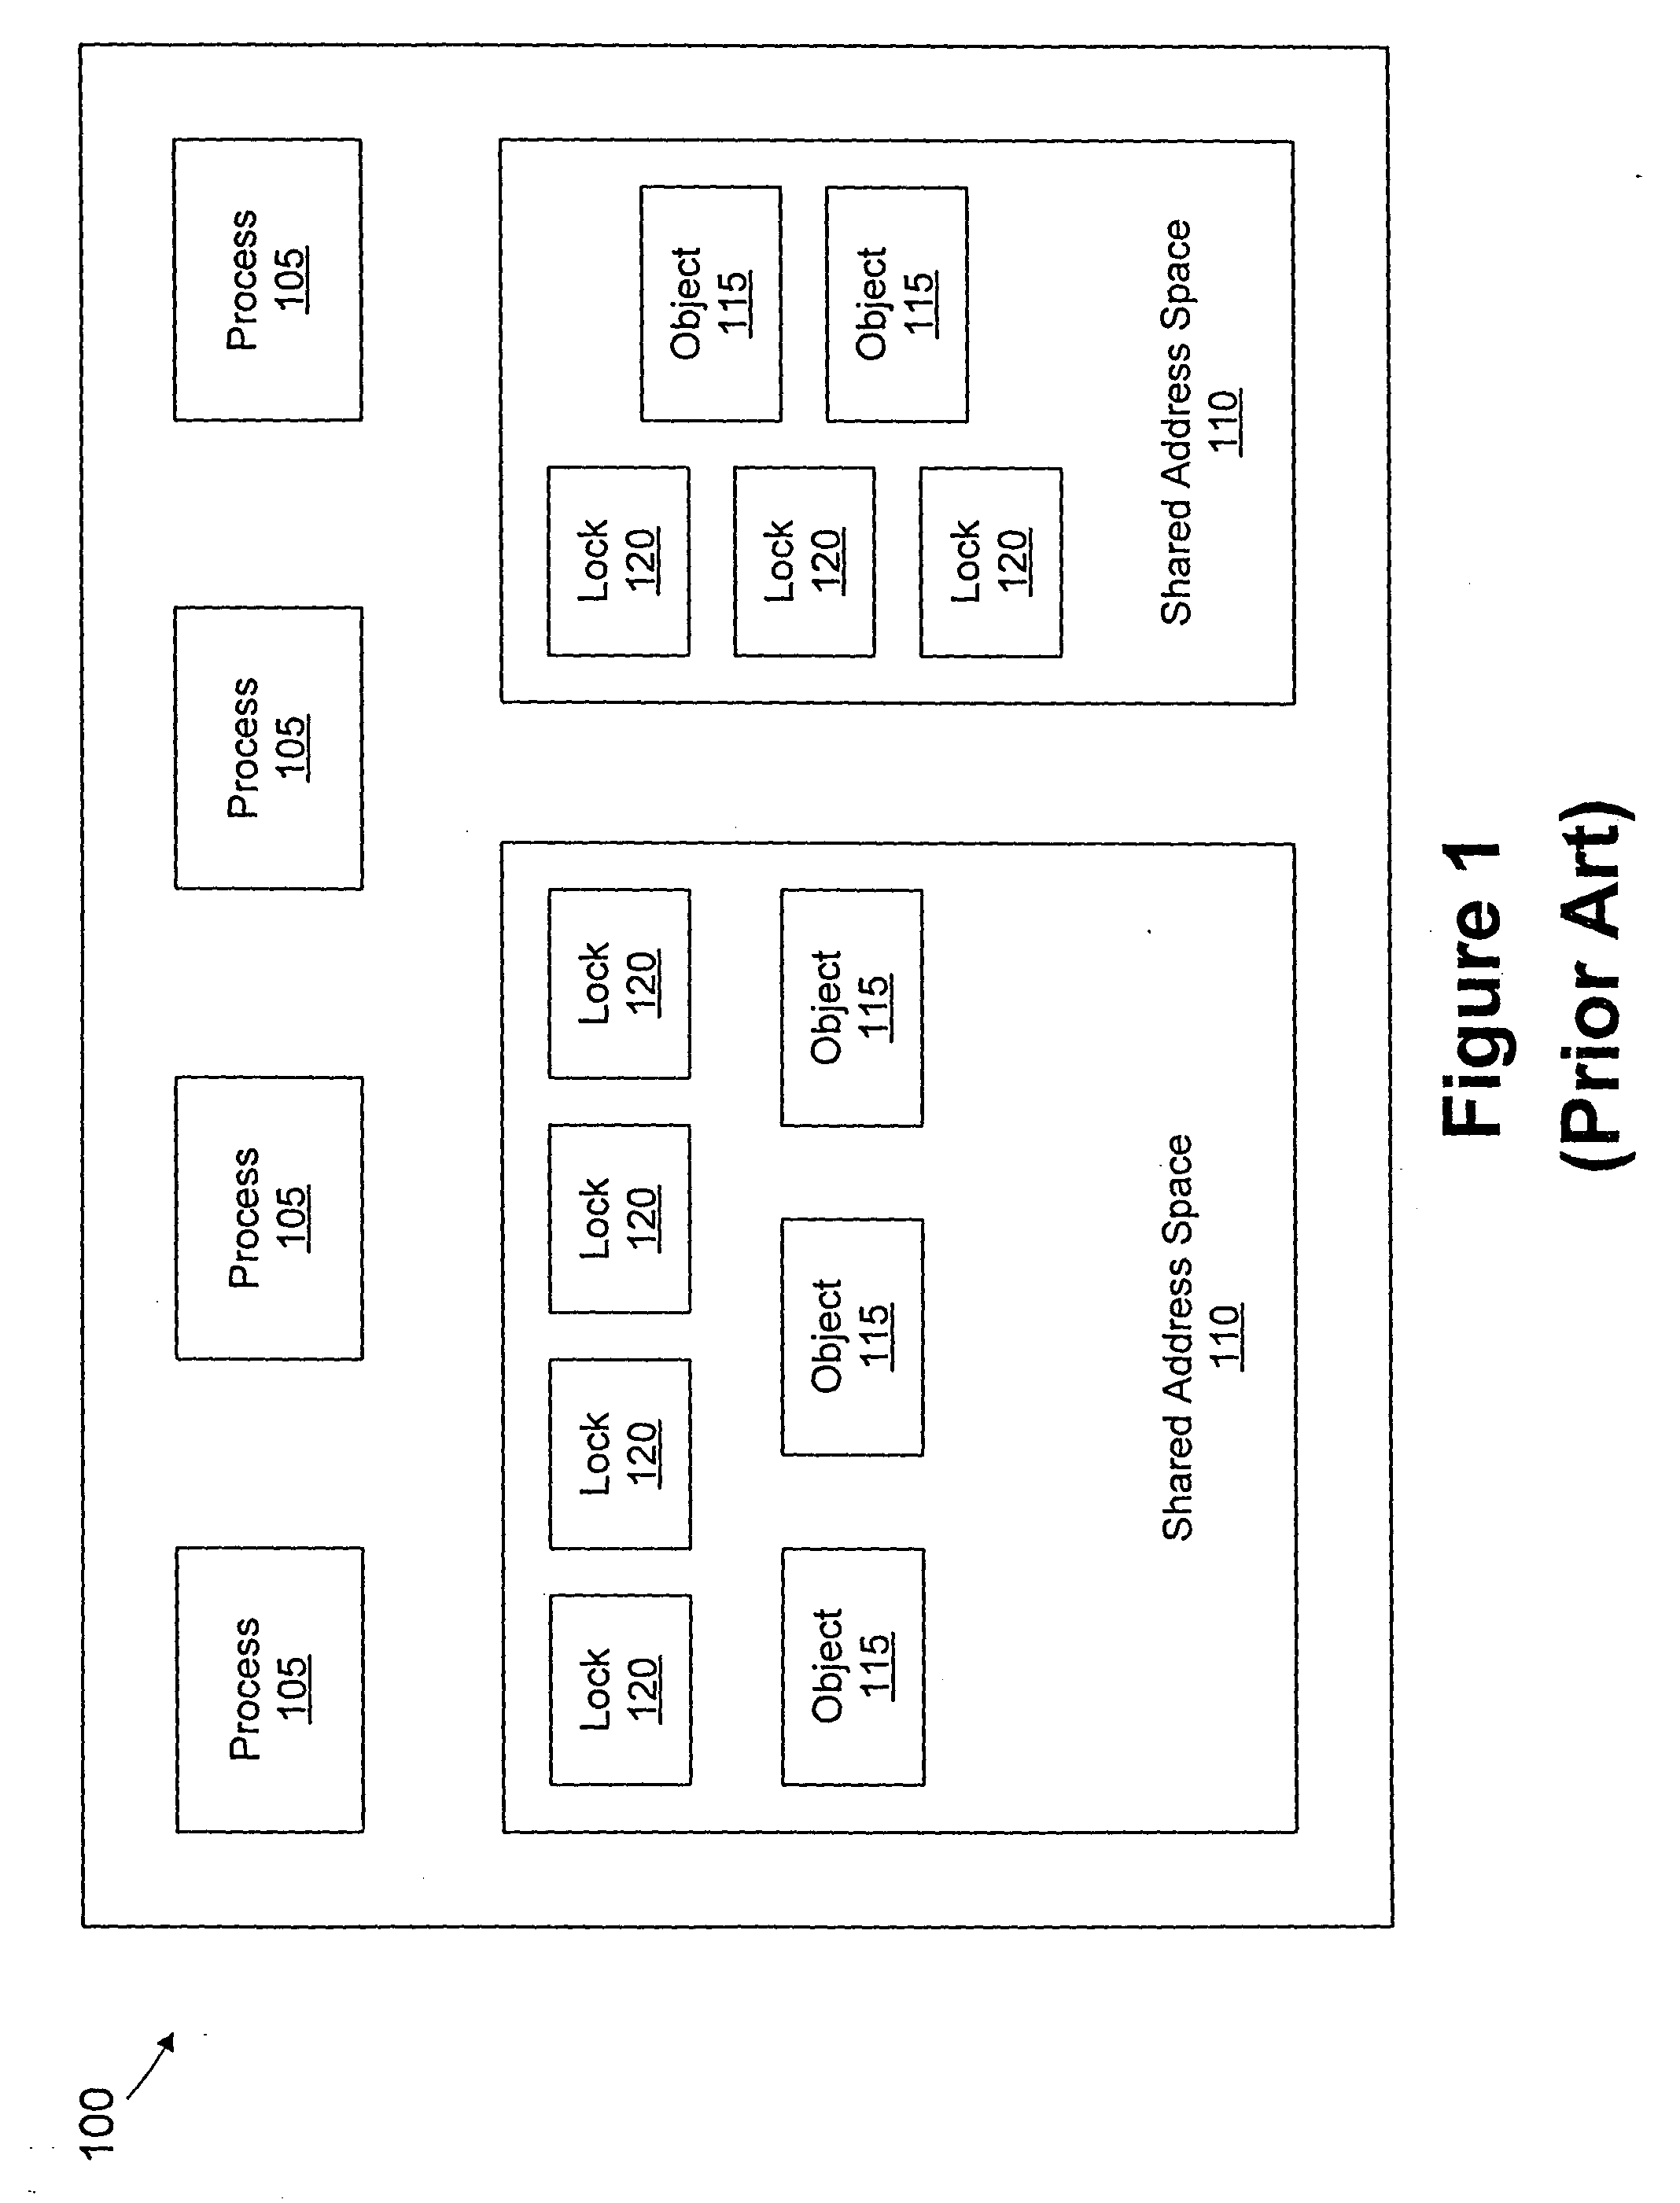 Fault tolerant mutual exclusion locks for shared memory systems